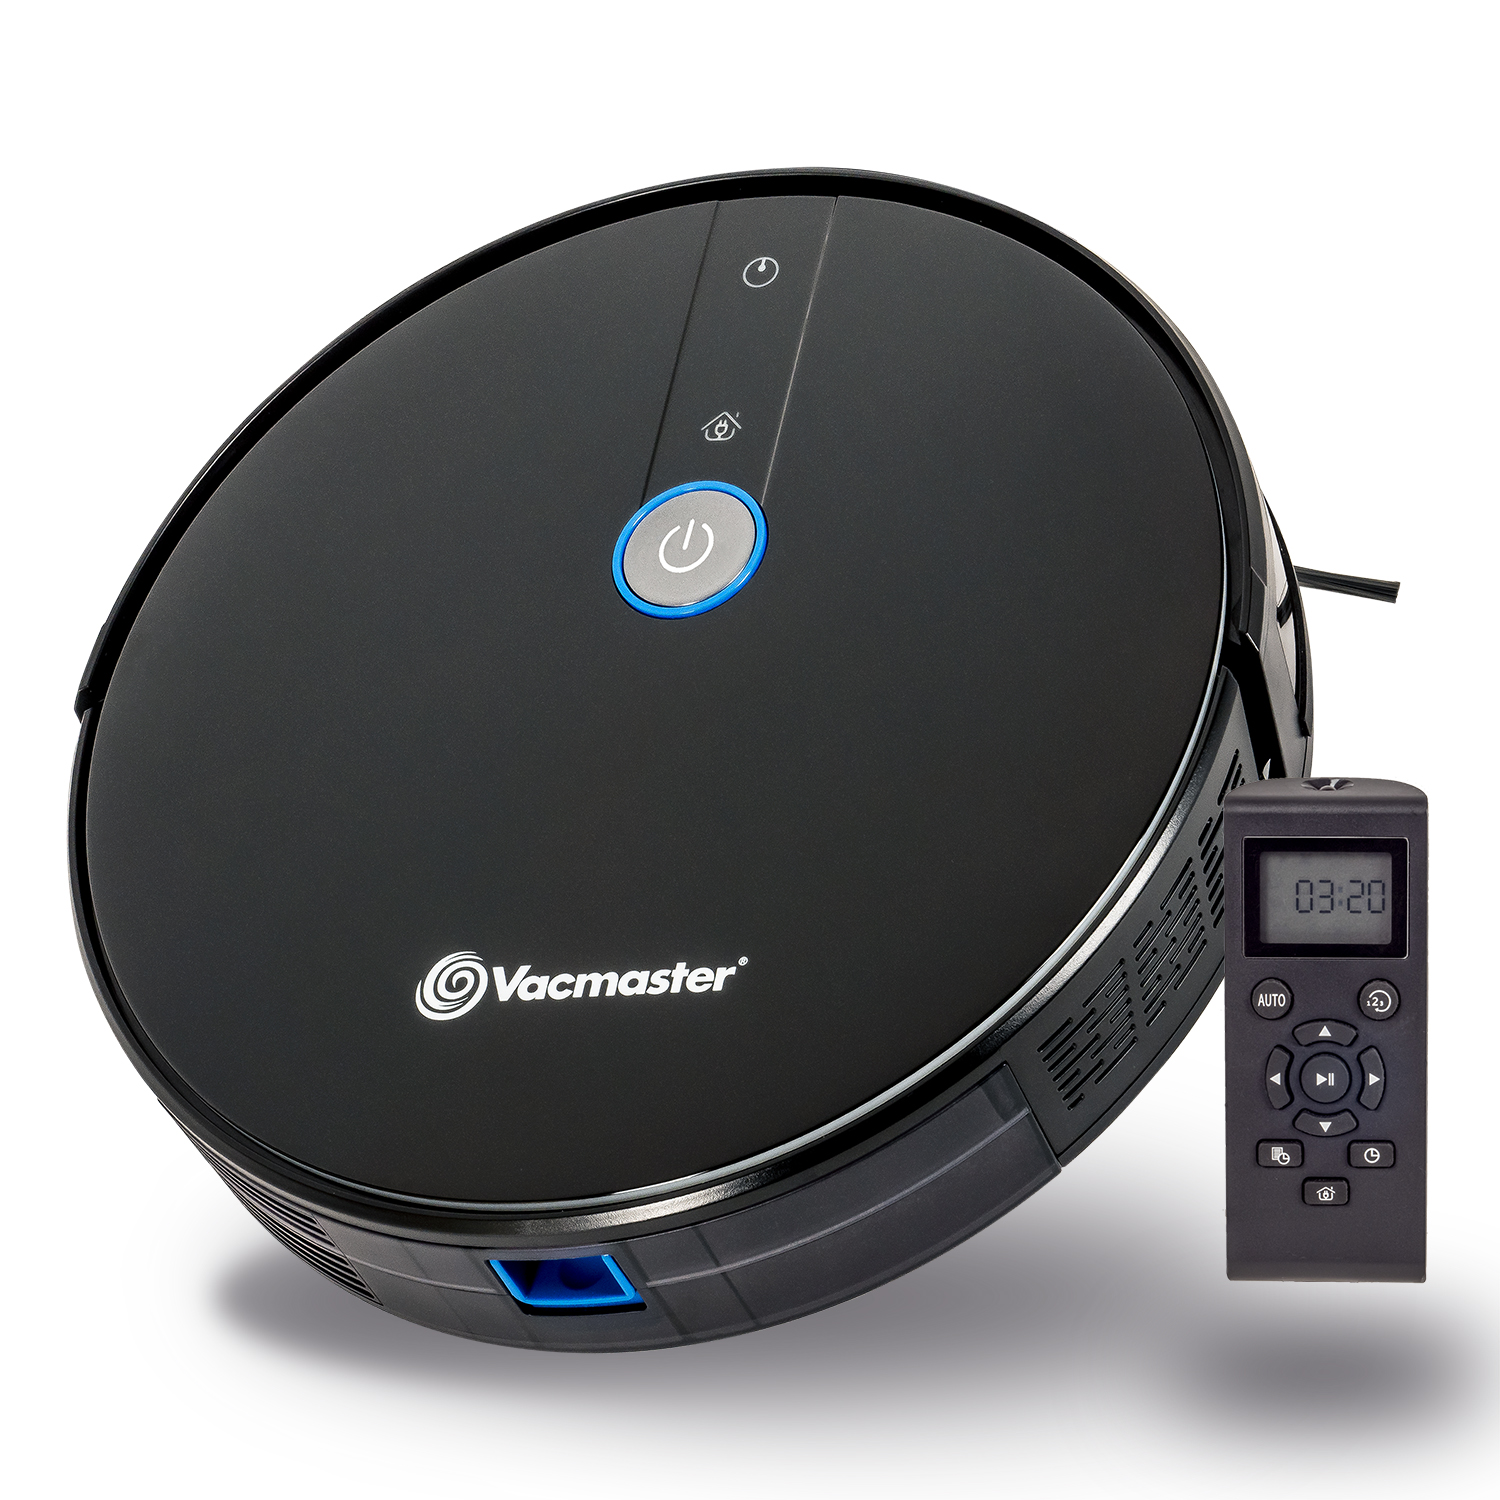 Vacmaster Smart Robot Vacuum with Remote Control & Smart Gyro Mapping Navigation JNPV12